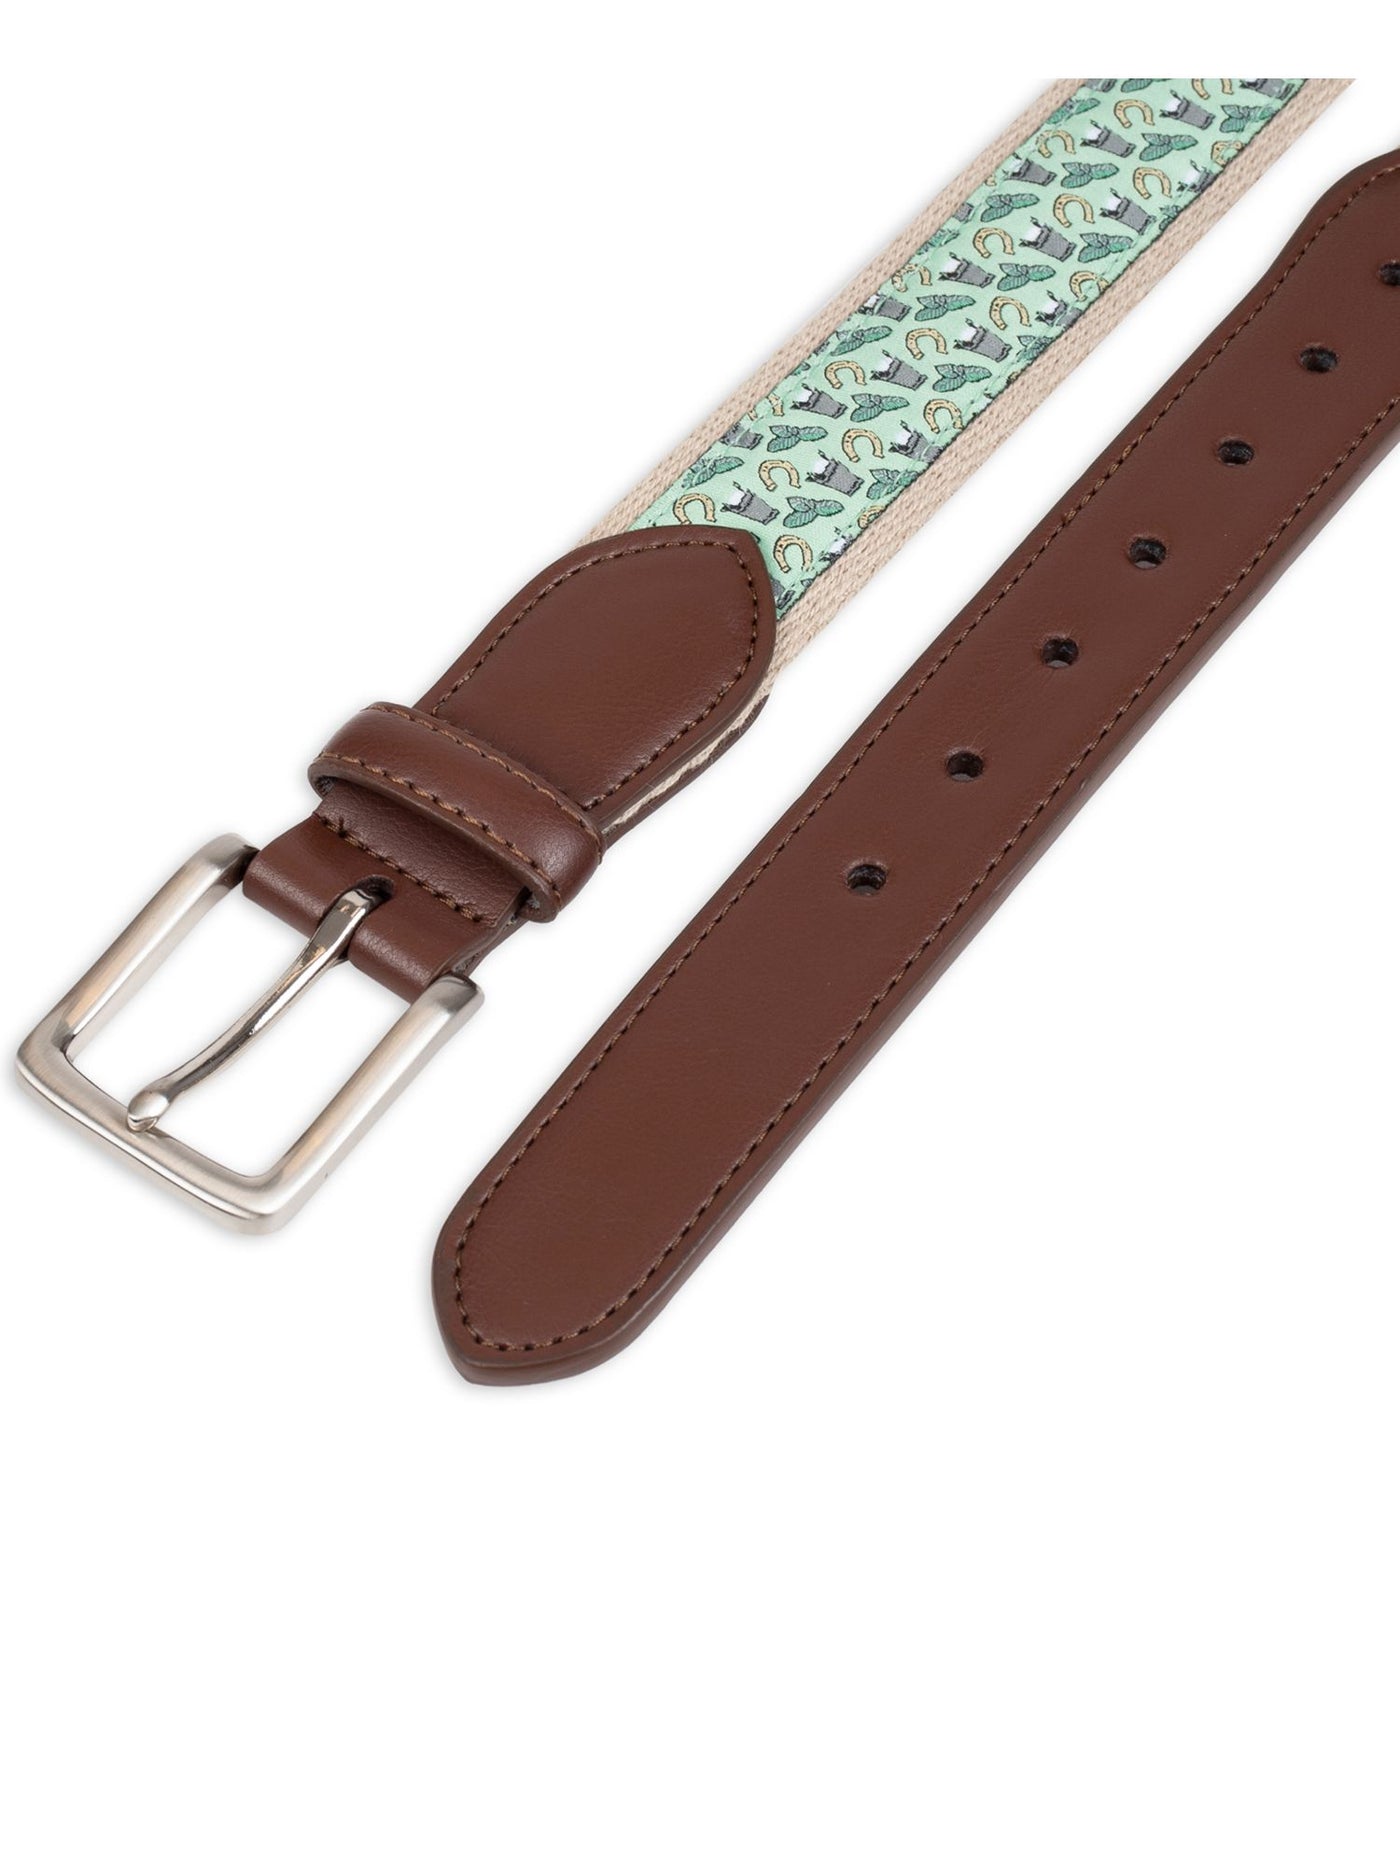 CLUBROOM Mens Green Horseshoe Print Adjustable Faux Leather Casual Belt S 30-32